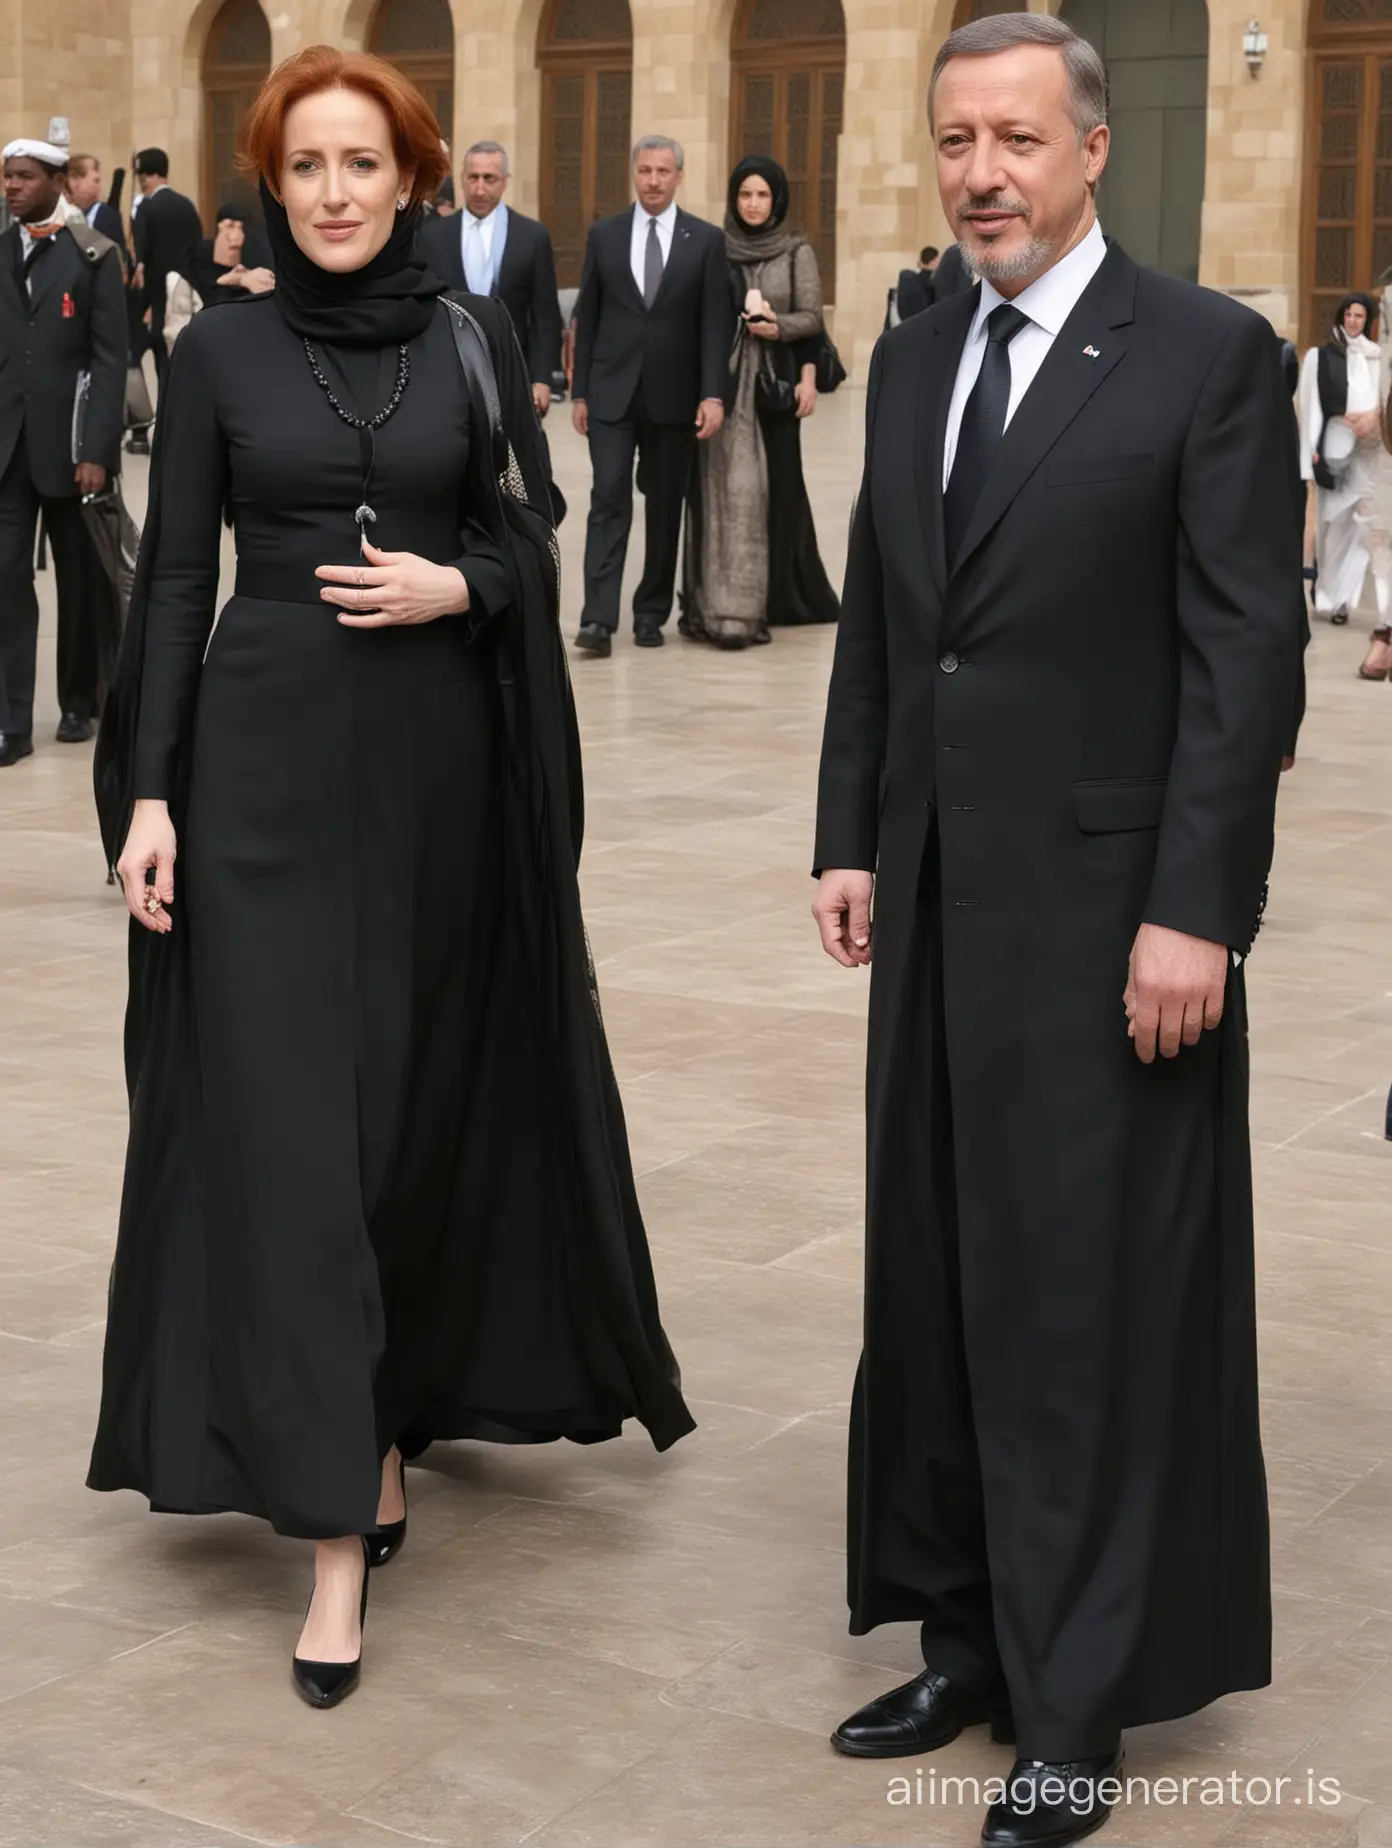 red haired Gillian Anderson with President Erdogan, he asked Gillian to dress accordingly to his Muslim faith and wear a floor-length black oversized jilbab with long black hijab and stand demurely beside him as  a submissive muslim wife